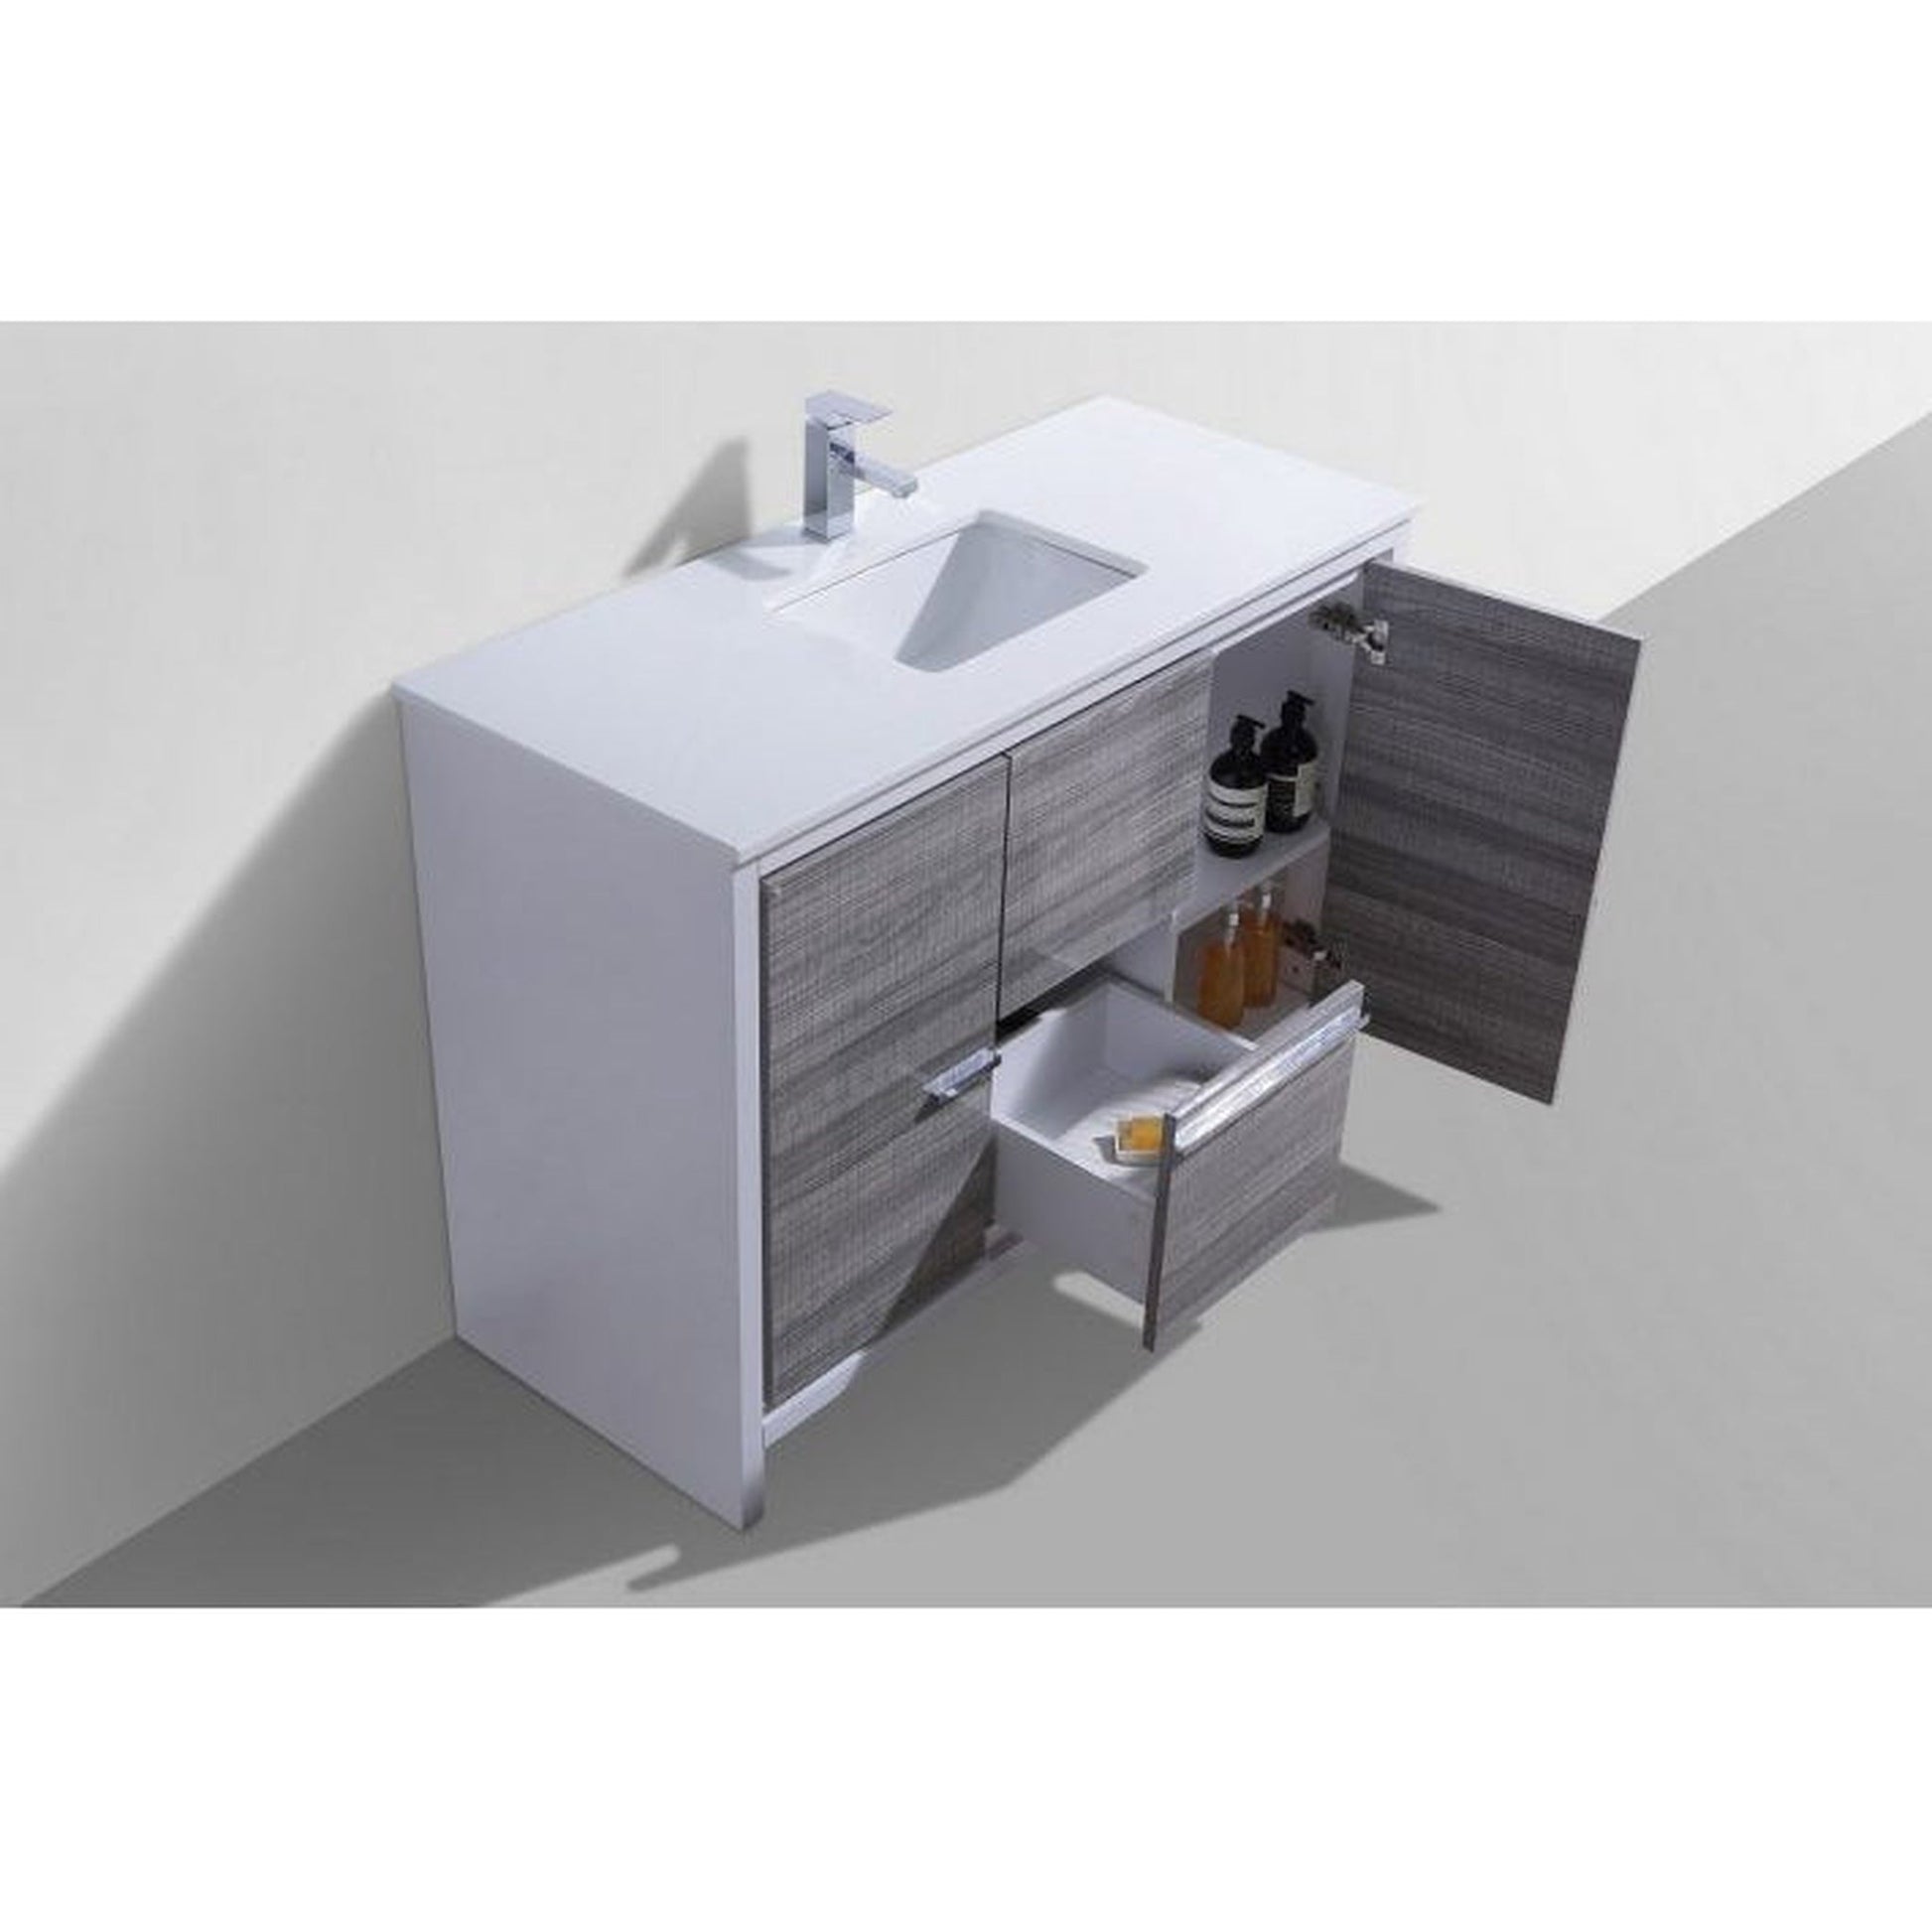 KubeBath Dolce 48" Ash Gray Freestanding Modern Bathroom Vanity With Quartz Vanity Top & Ceramic Sink With Overflow and 48" White Framed Mirror With Shelf